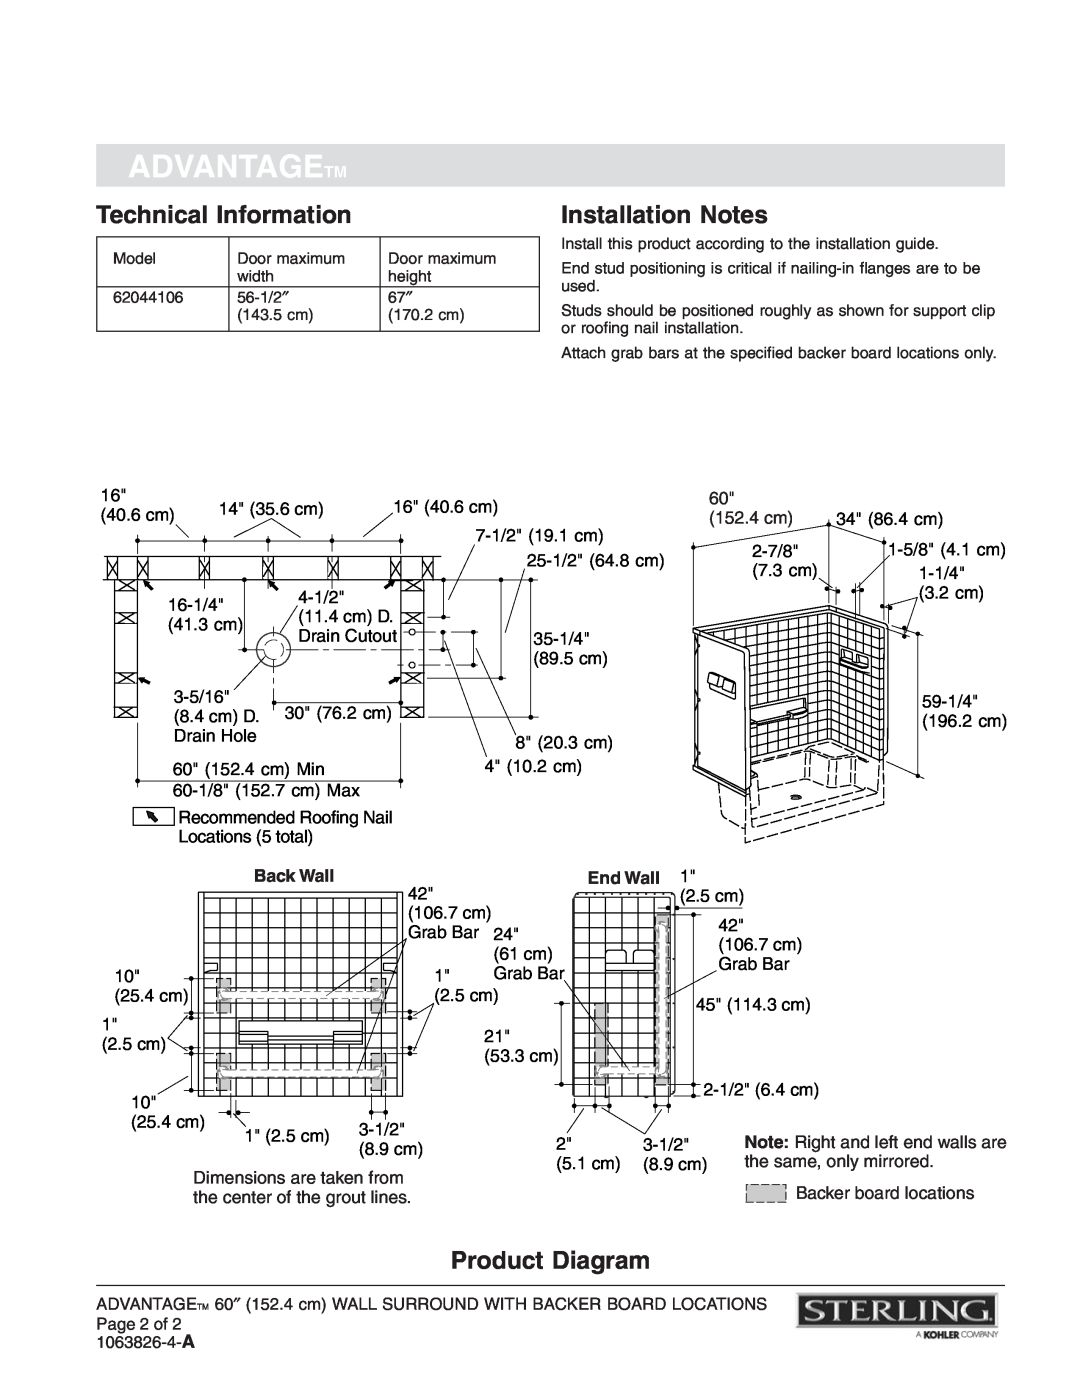 Sterling Plumbing 62044106 Technical Information, Installation Notes, Product Diagram, Advantagetm, Back Wall, End Wall 